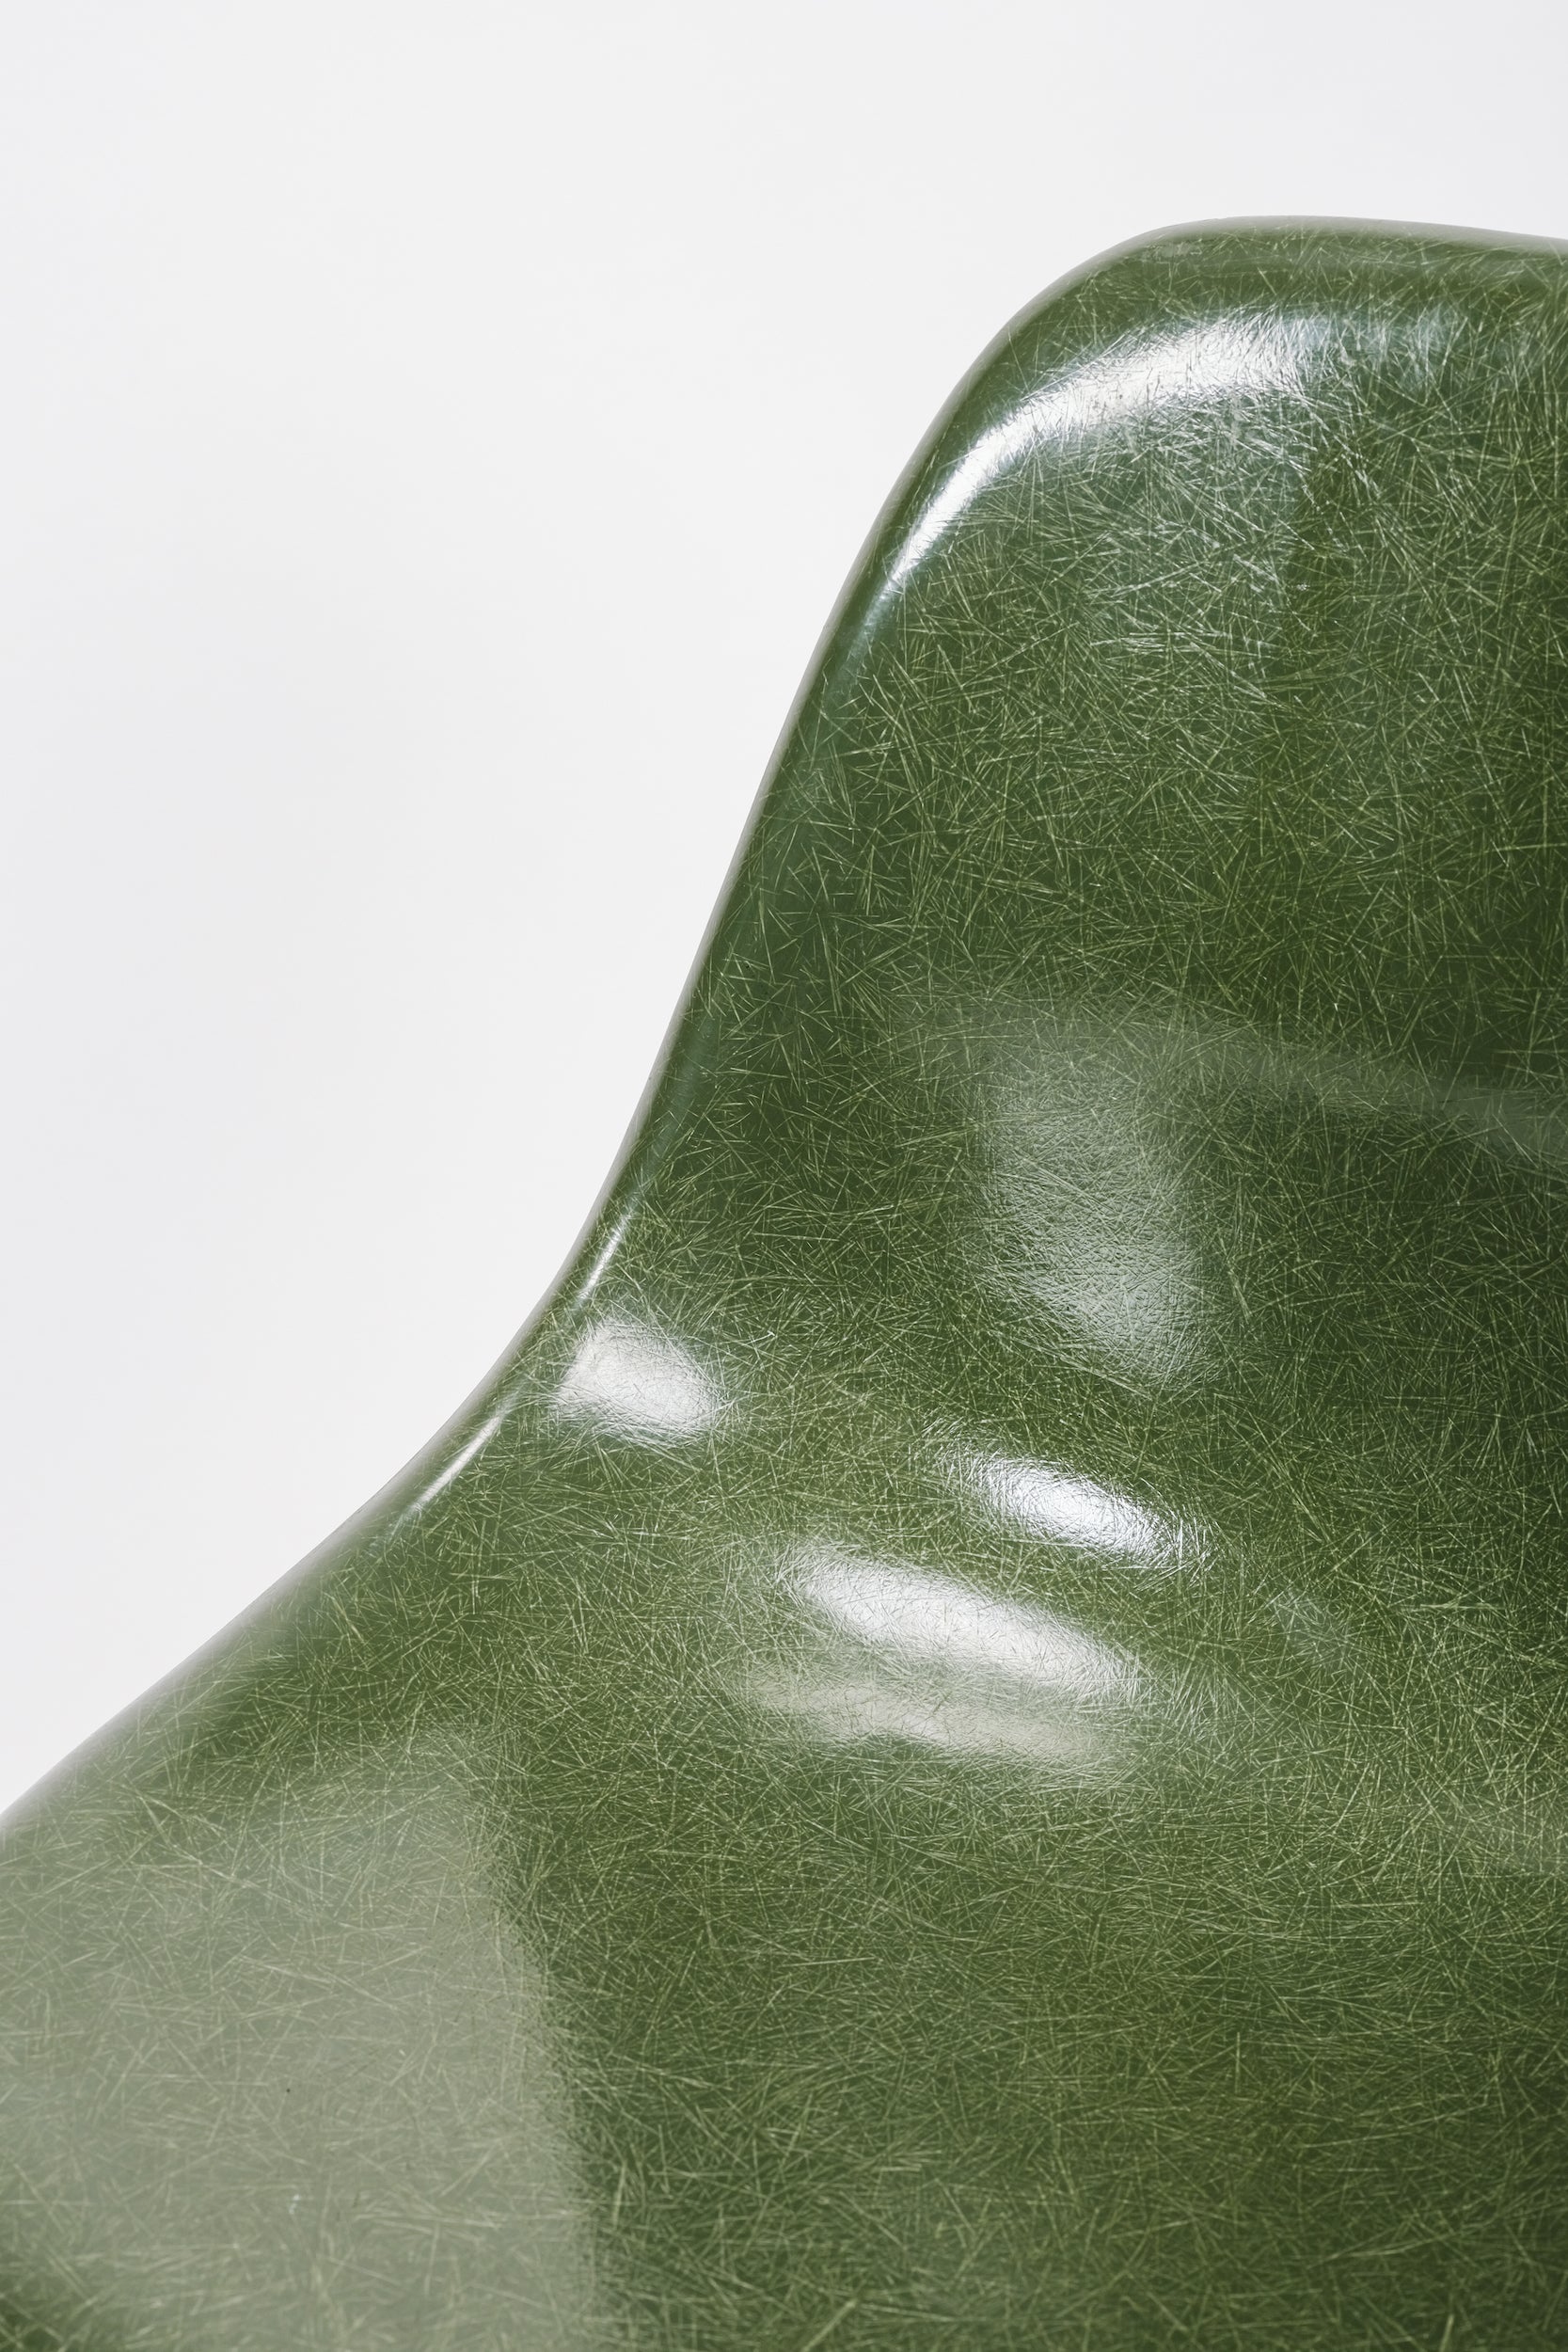 Charles & Ray Eames Fiberglass Chairs, Set of 3, Olive Green, 60s